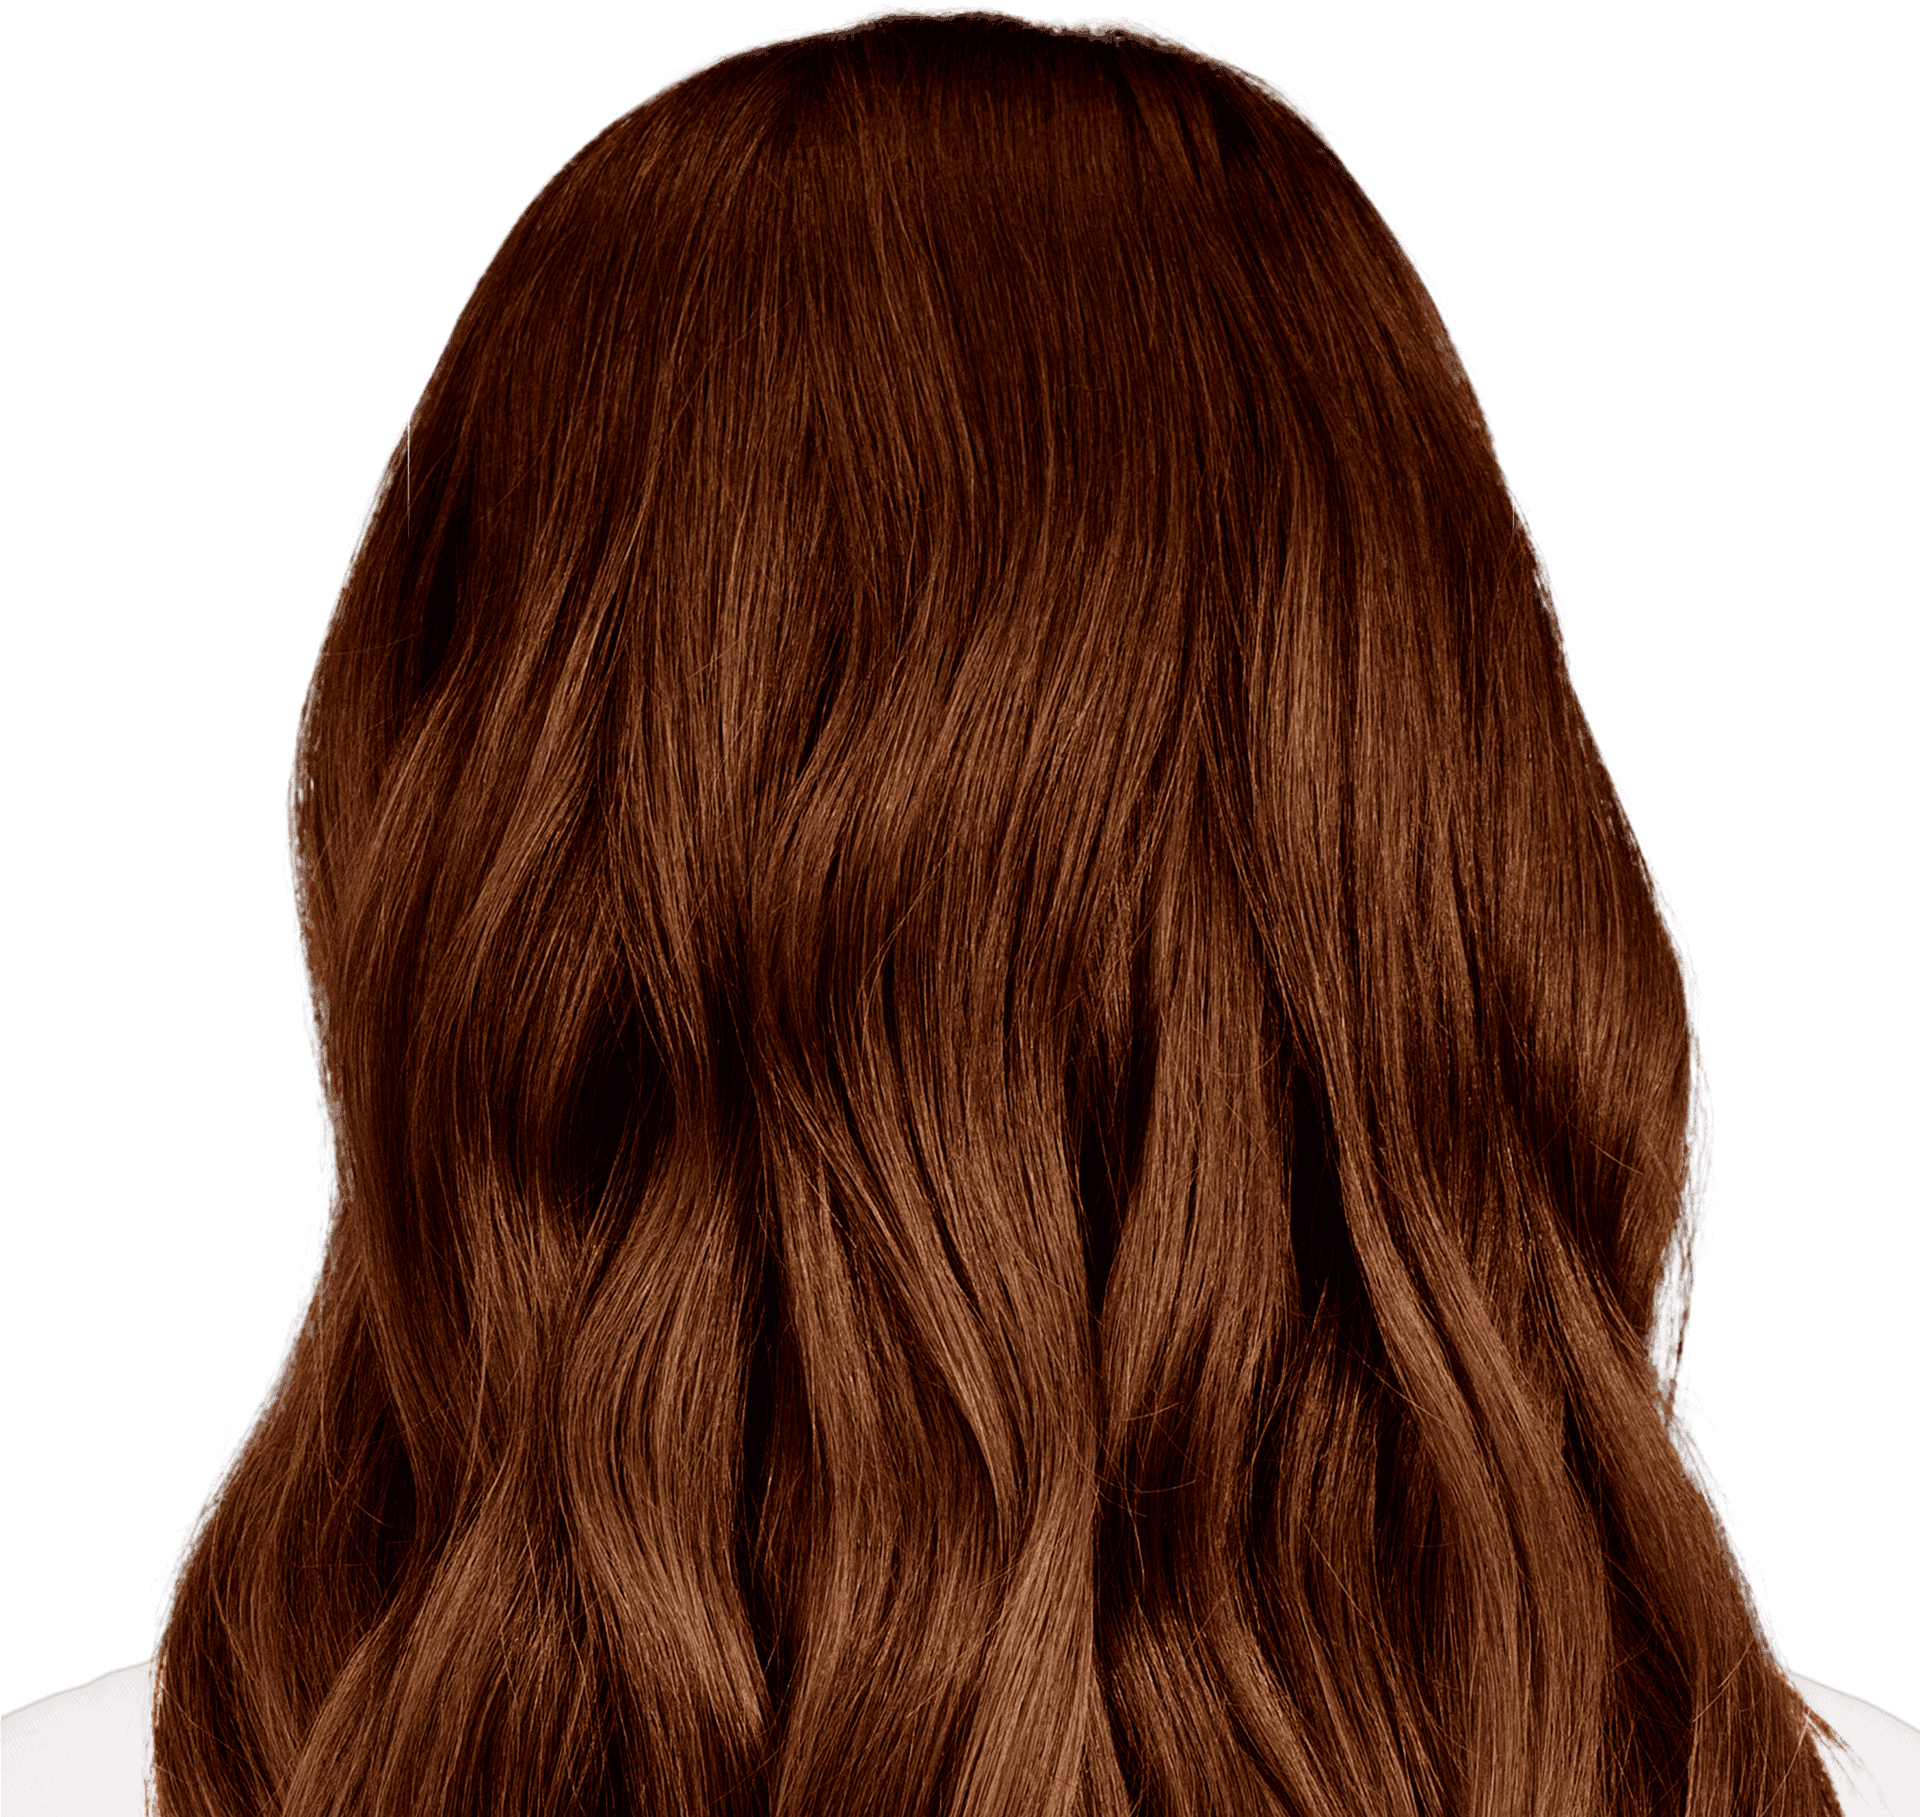 Rich Brown Wavy Hair Texture PNG